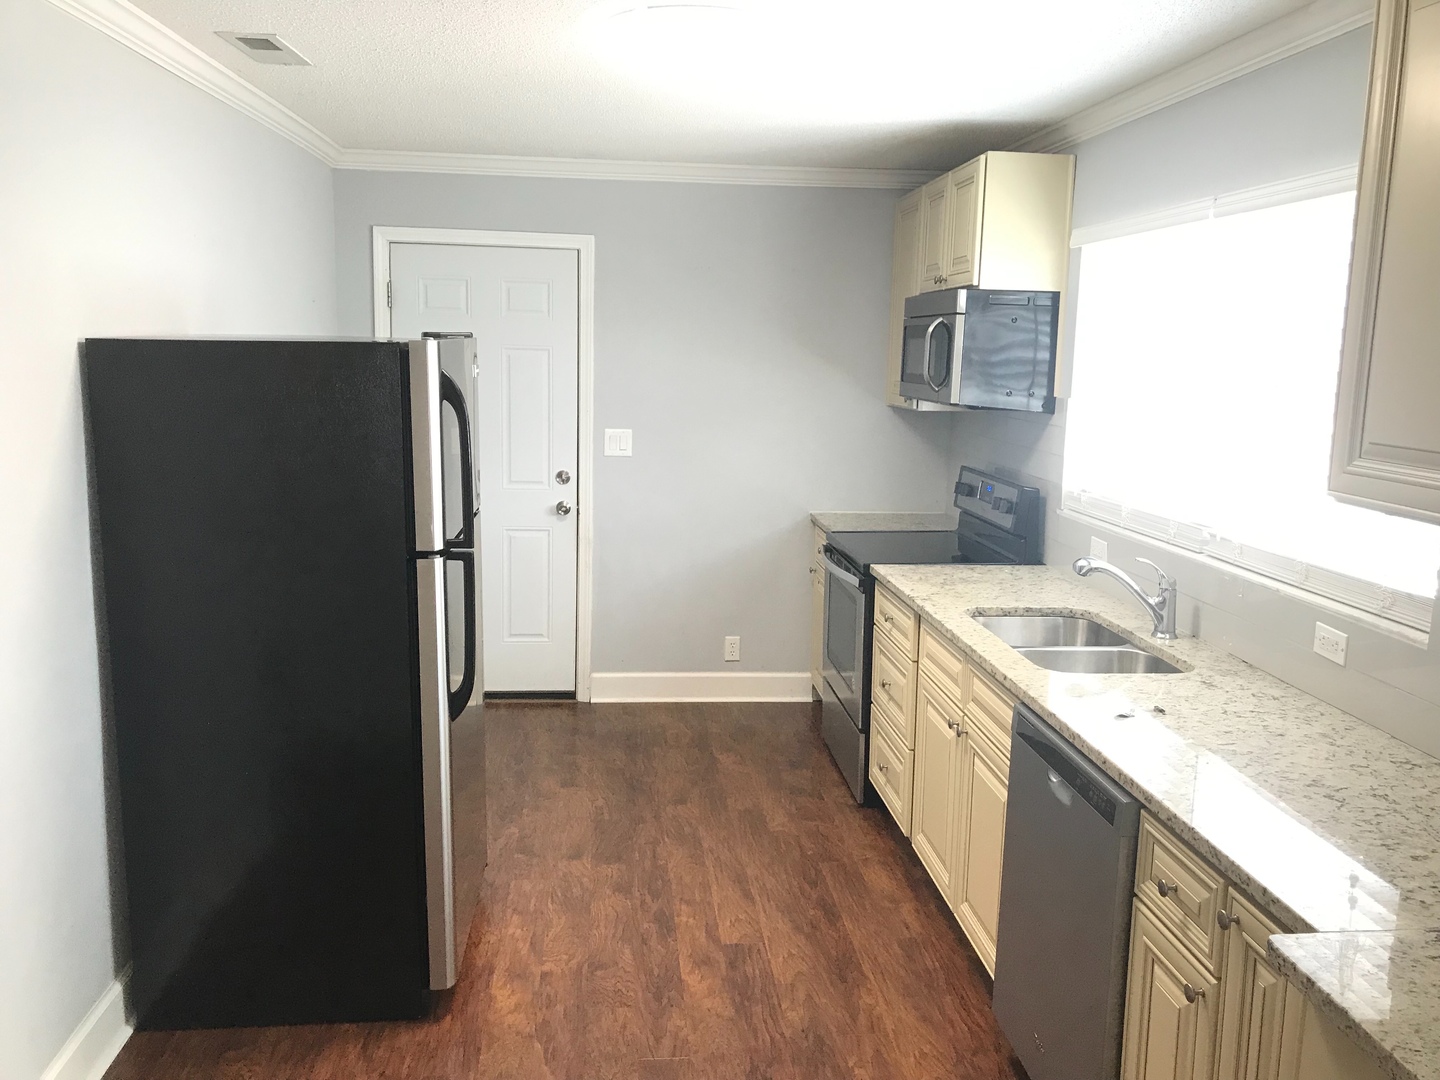 2Bed/1Ba Duplex close to Downtown Concord Fully Renovated with Laundry Room on Site